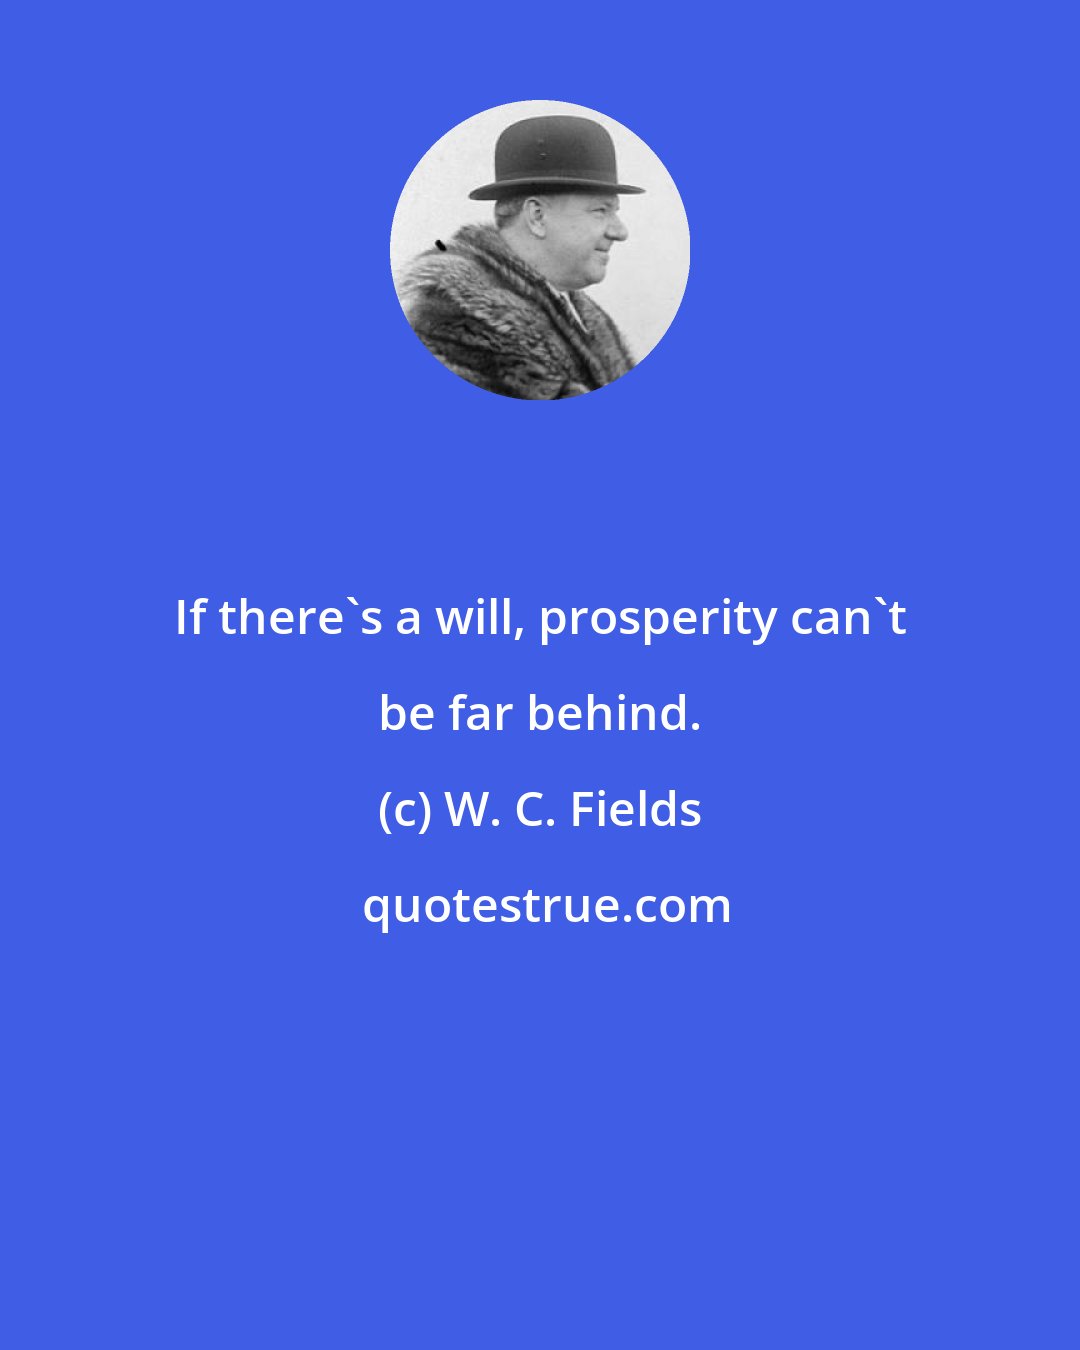 W. C. Fields: If there's a will, prosperity can't be far behind.